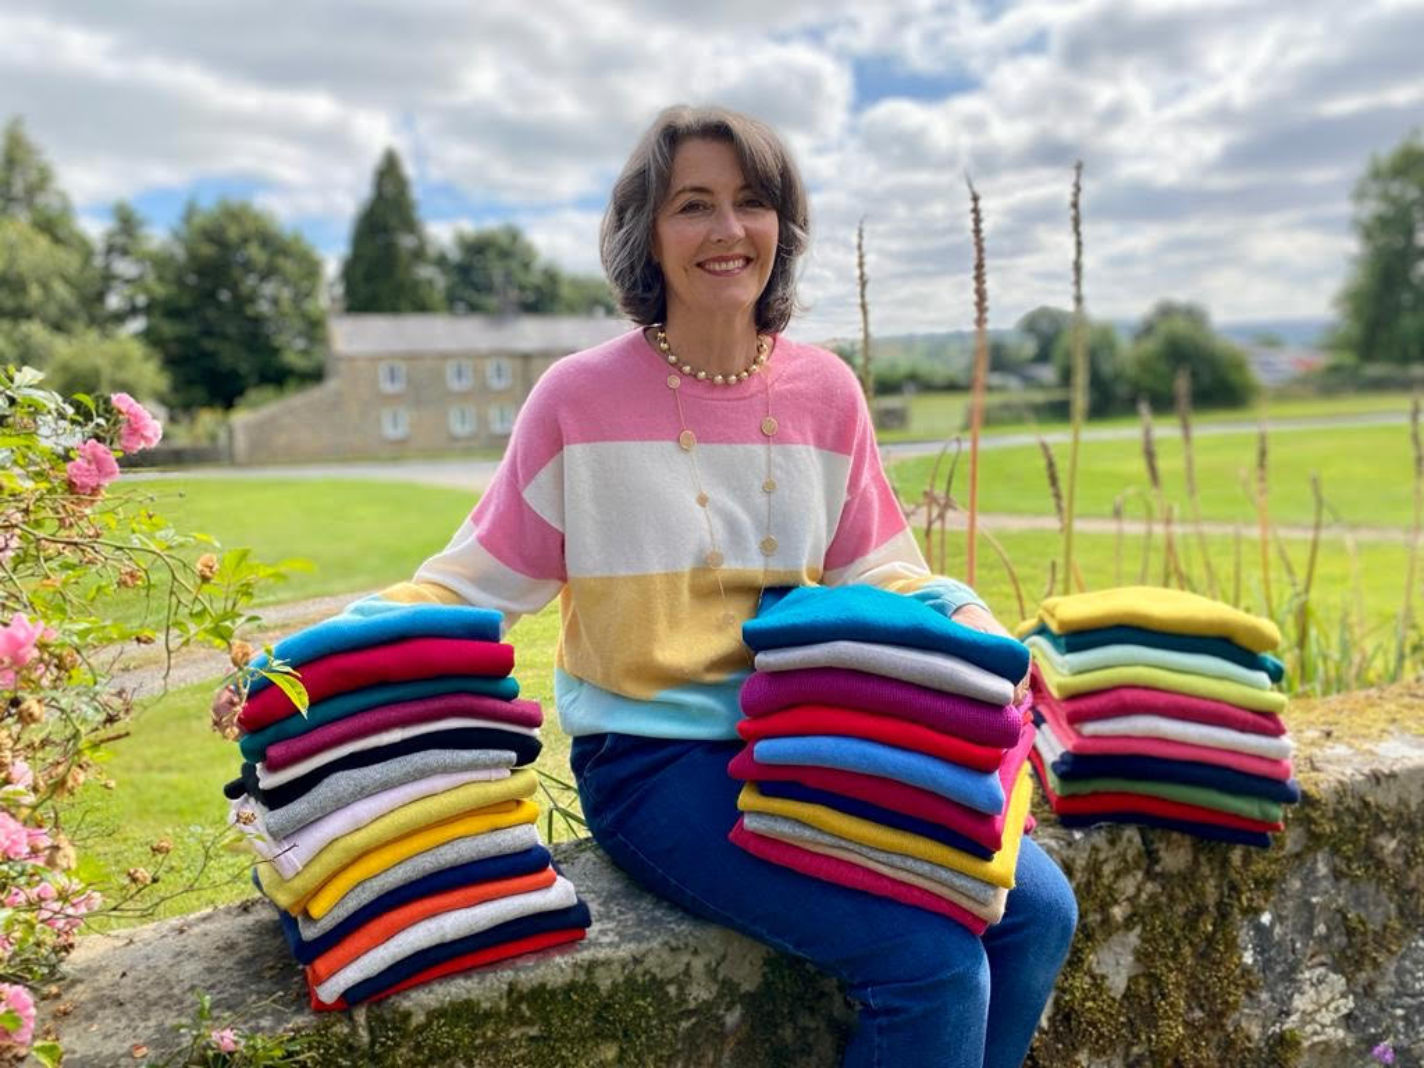 Alison Orr from the village of Masham in the Yorkshire Dales was an early adopter of the sustainable fashion movement, long before the terms sustainable and slow fashion became prominent.